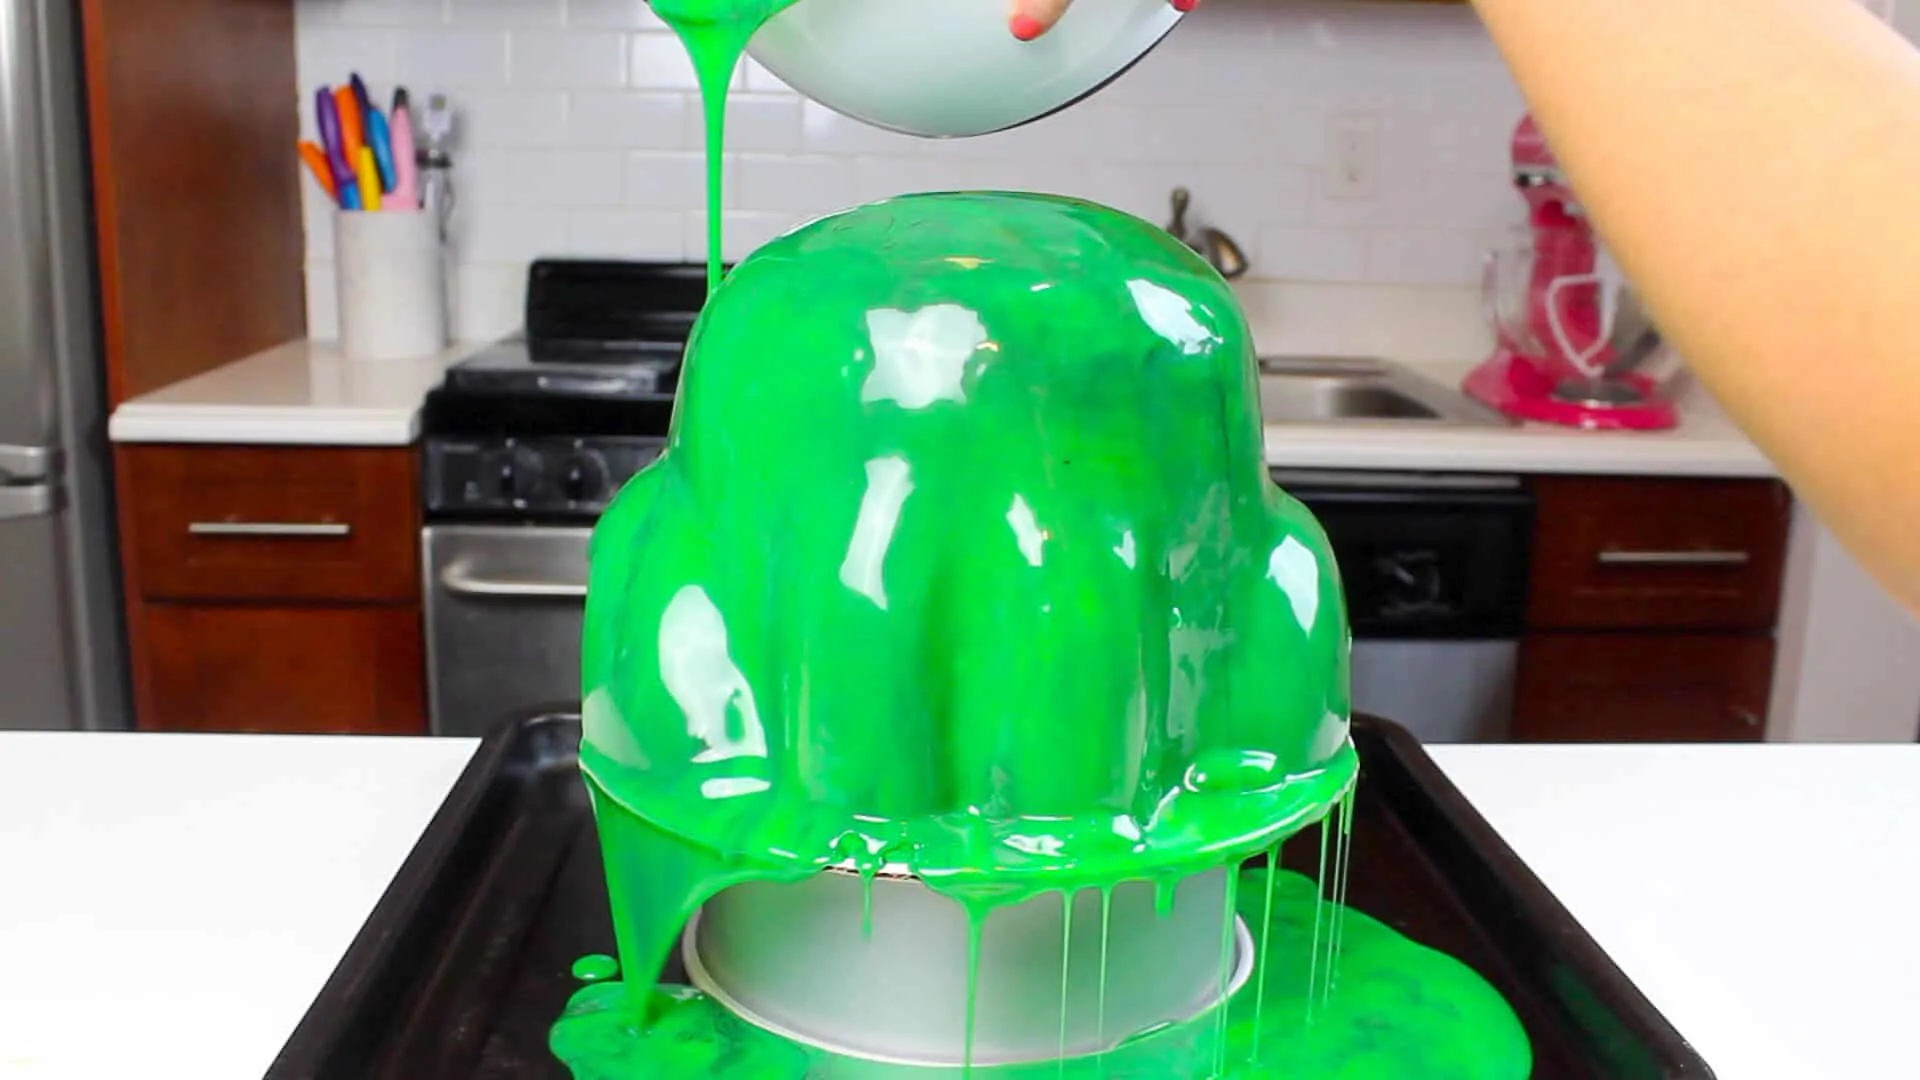 pouring glaze over frog cake #2